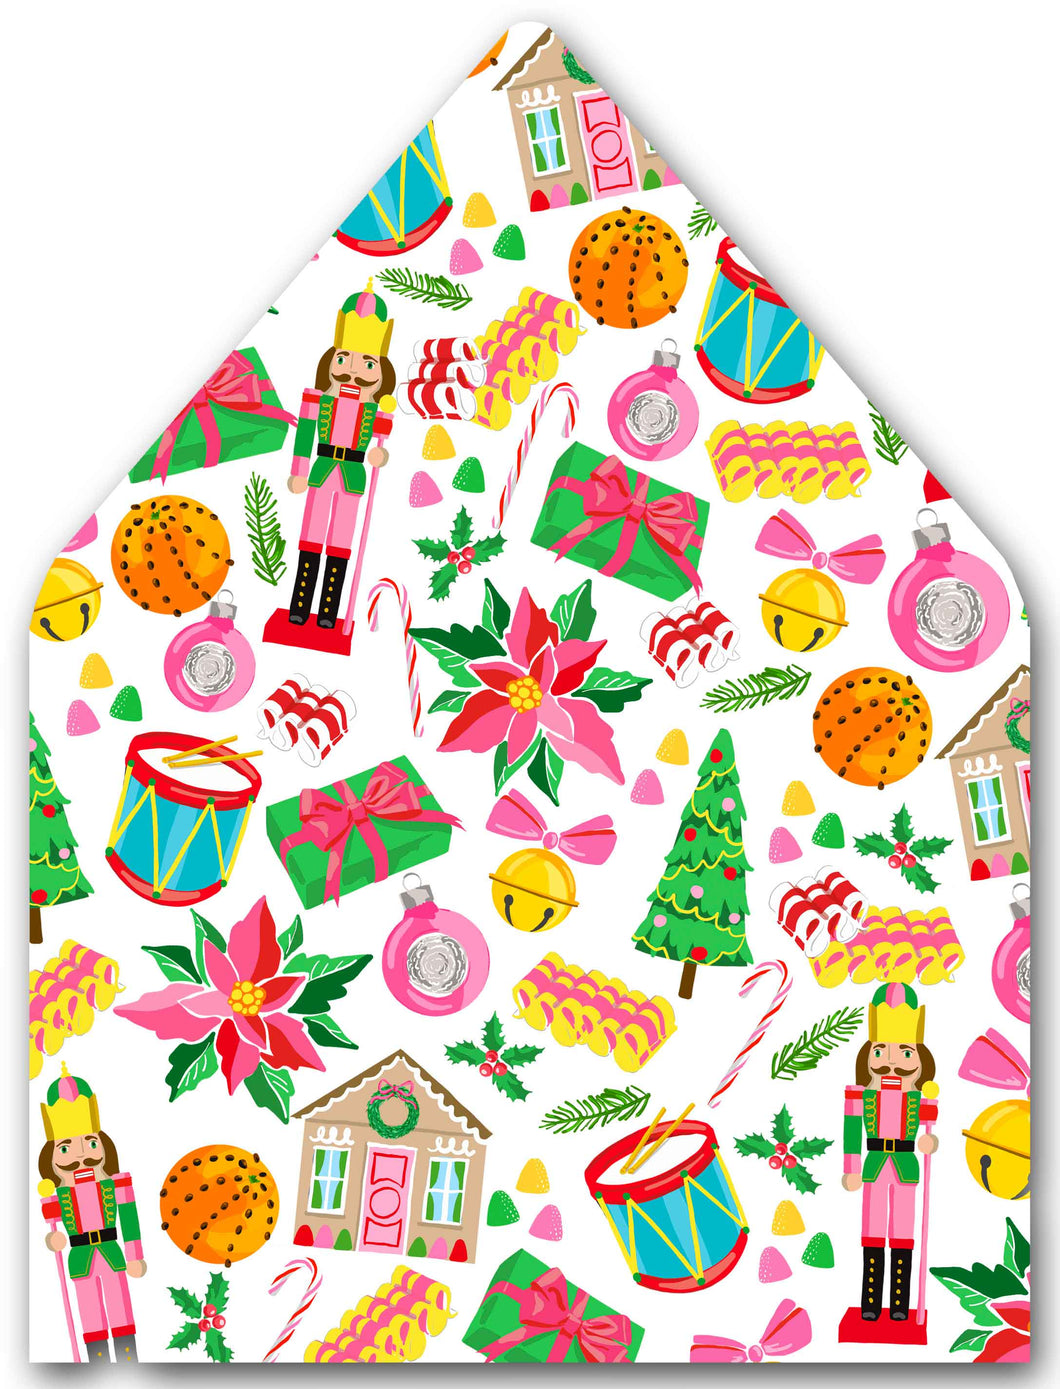 Christmas Crest Coordinate A9 Patterned Envelope Liners